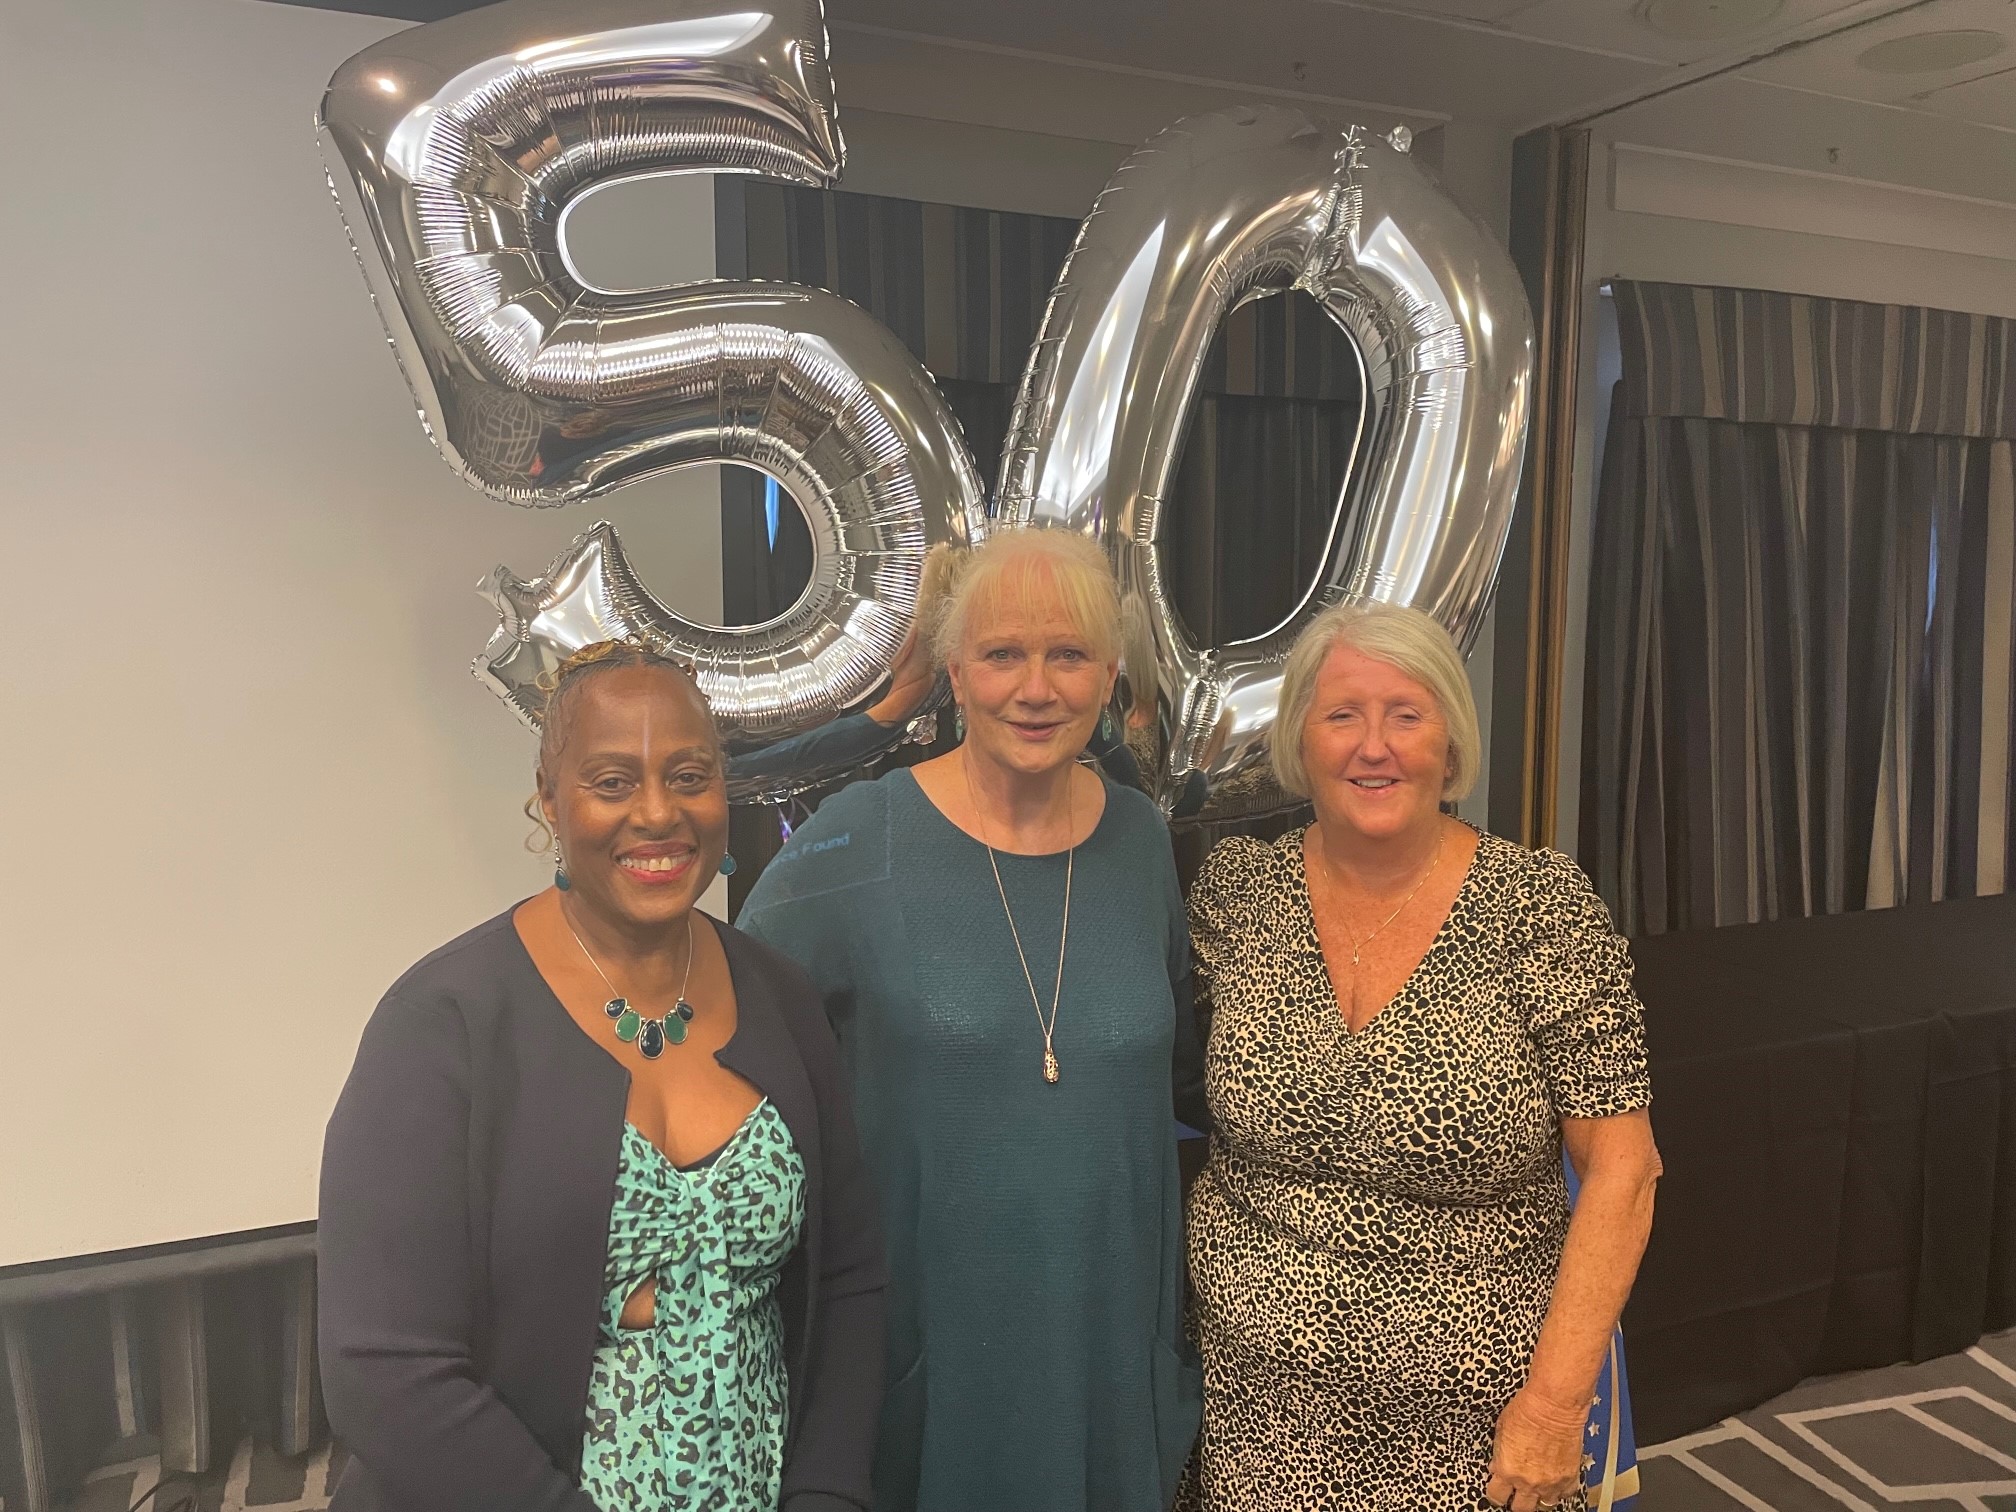 Staff with 50 years' NHS service